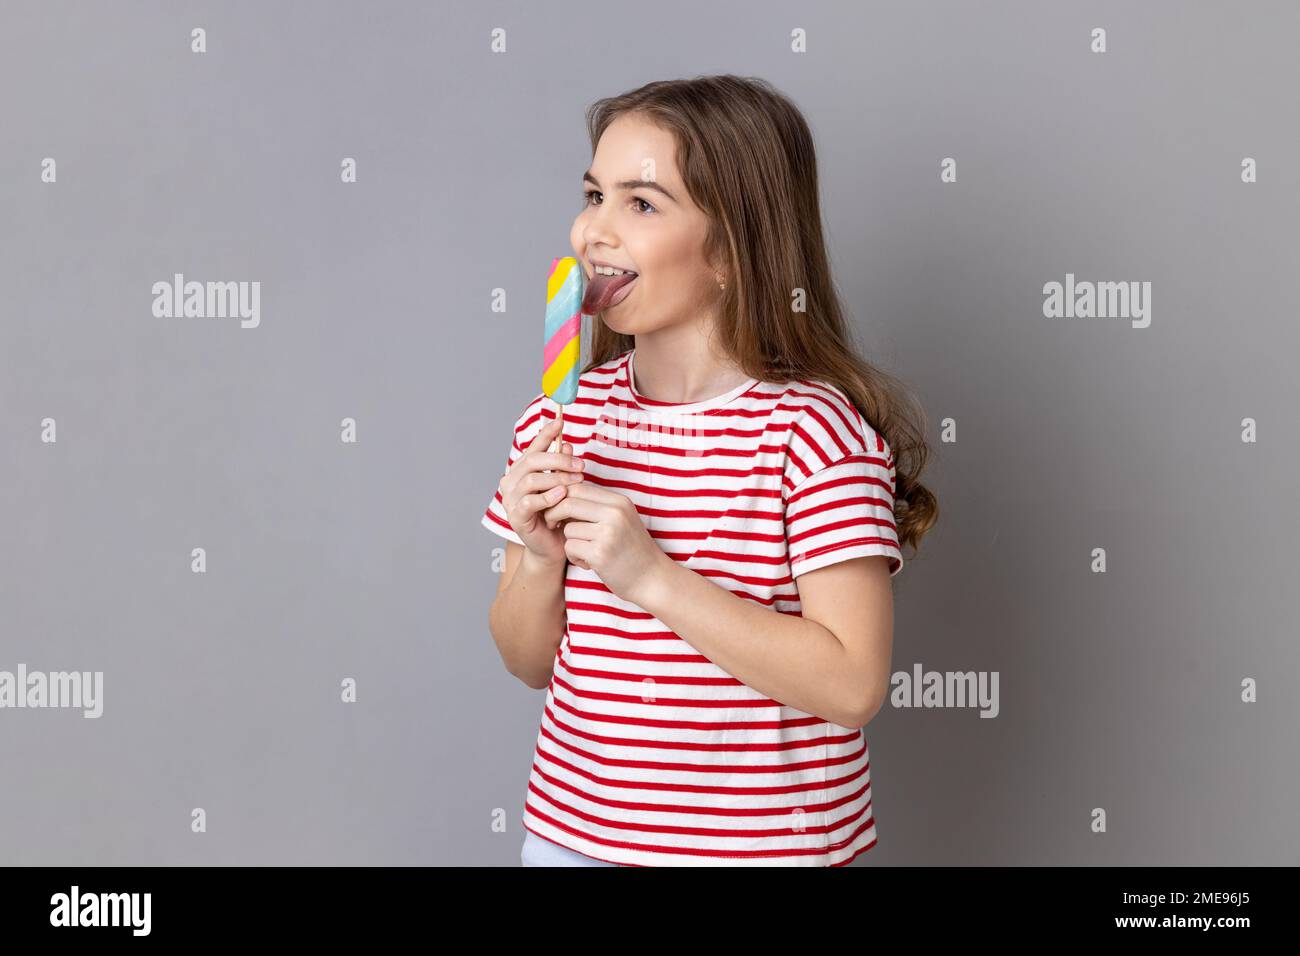 Portrait of little girl wearing striped T-shirt holding colorful candy, licking, looking away with childish satisfied expression. Indoor studio shot isolated on gray background. Stock Photo